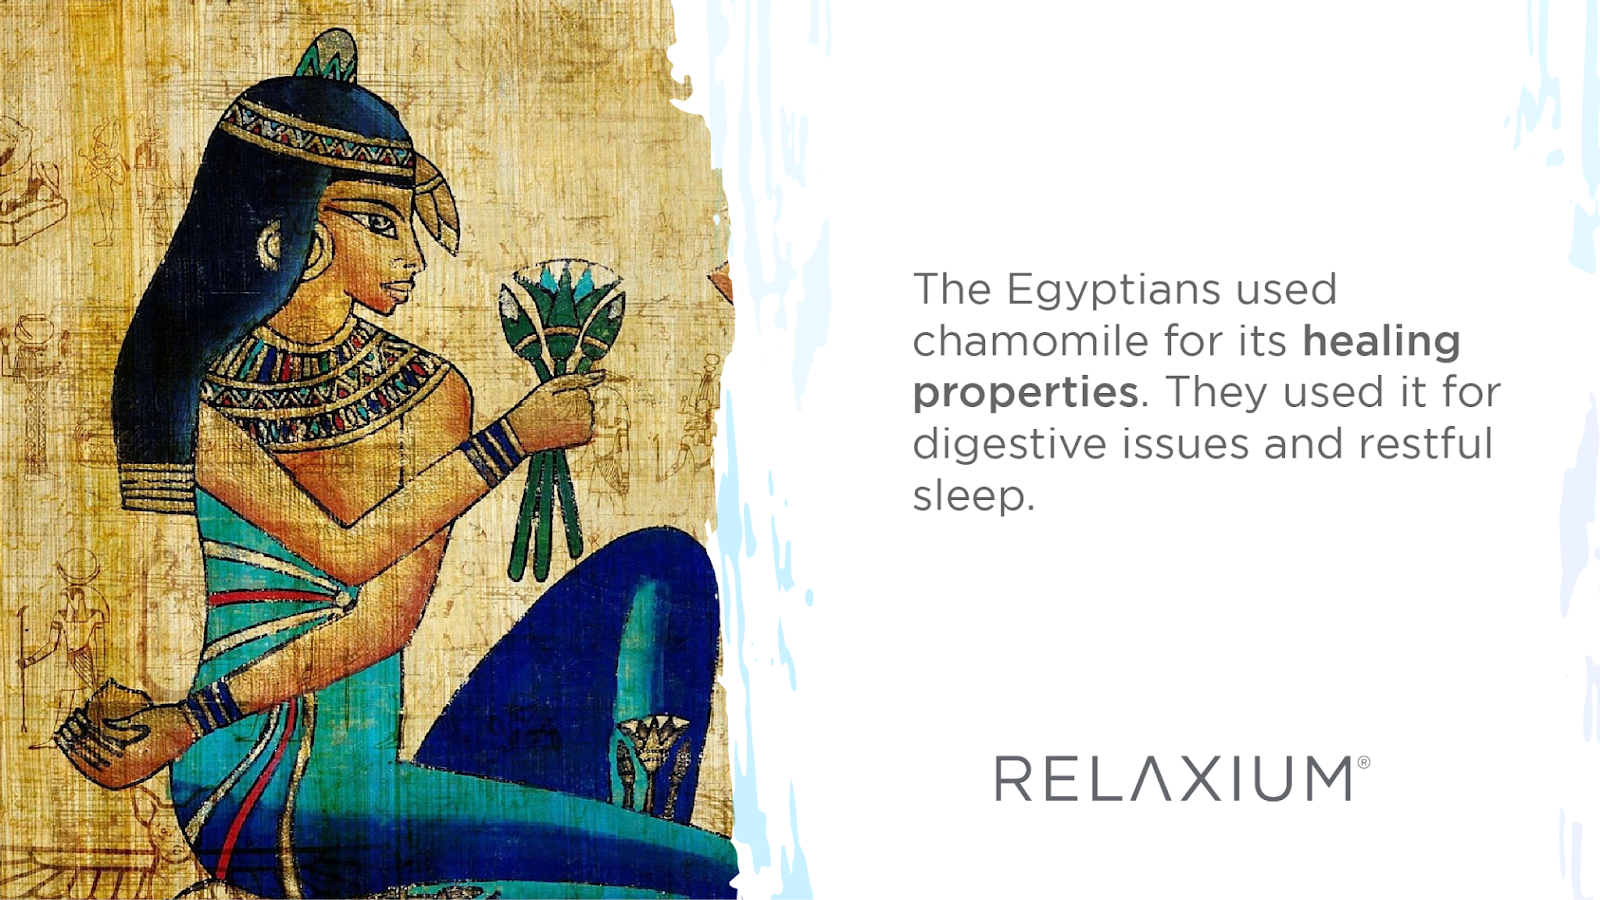 Egyptians used chamomile for its healing properties.